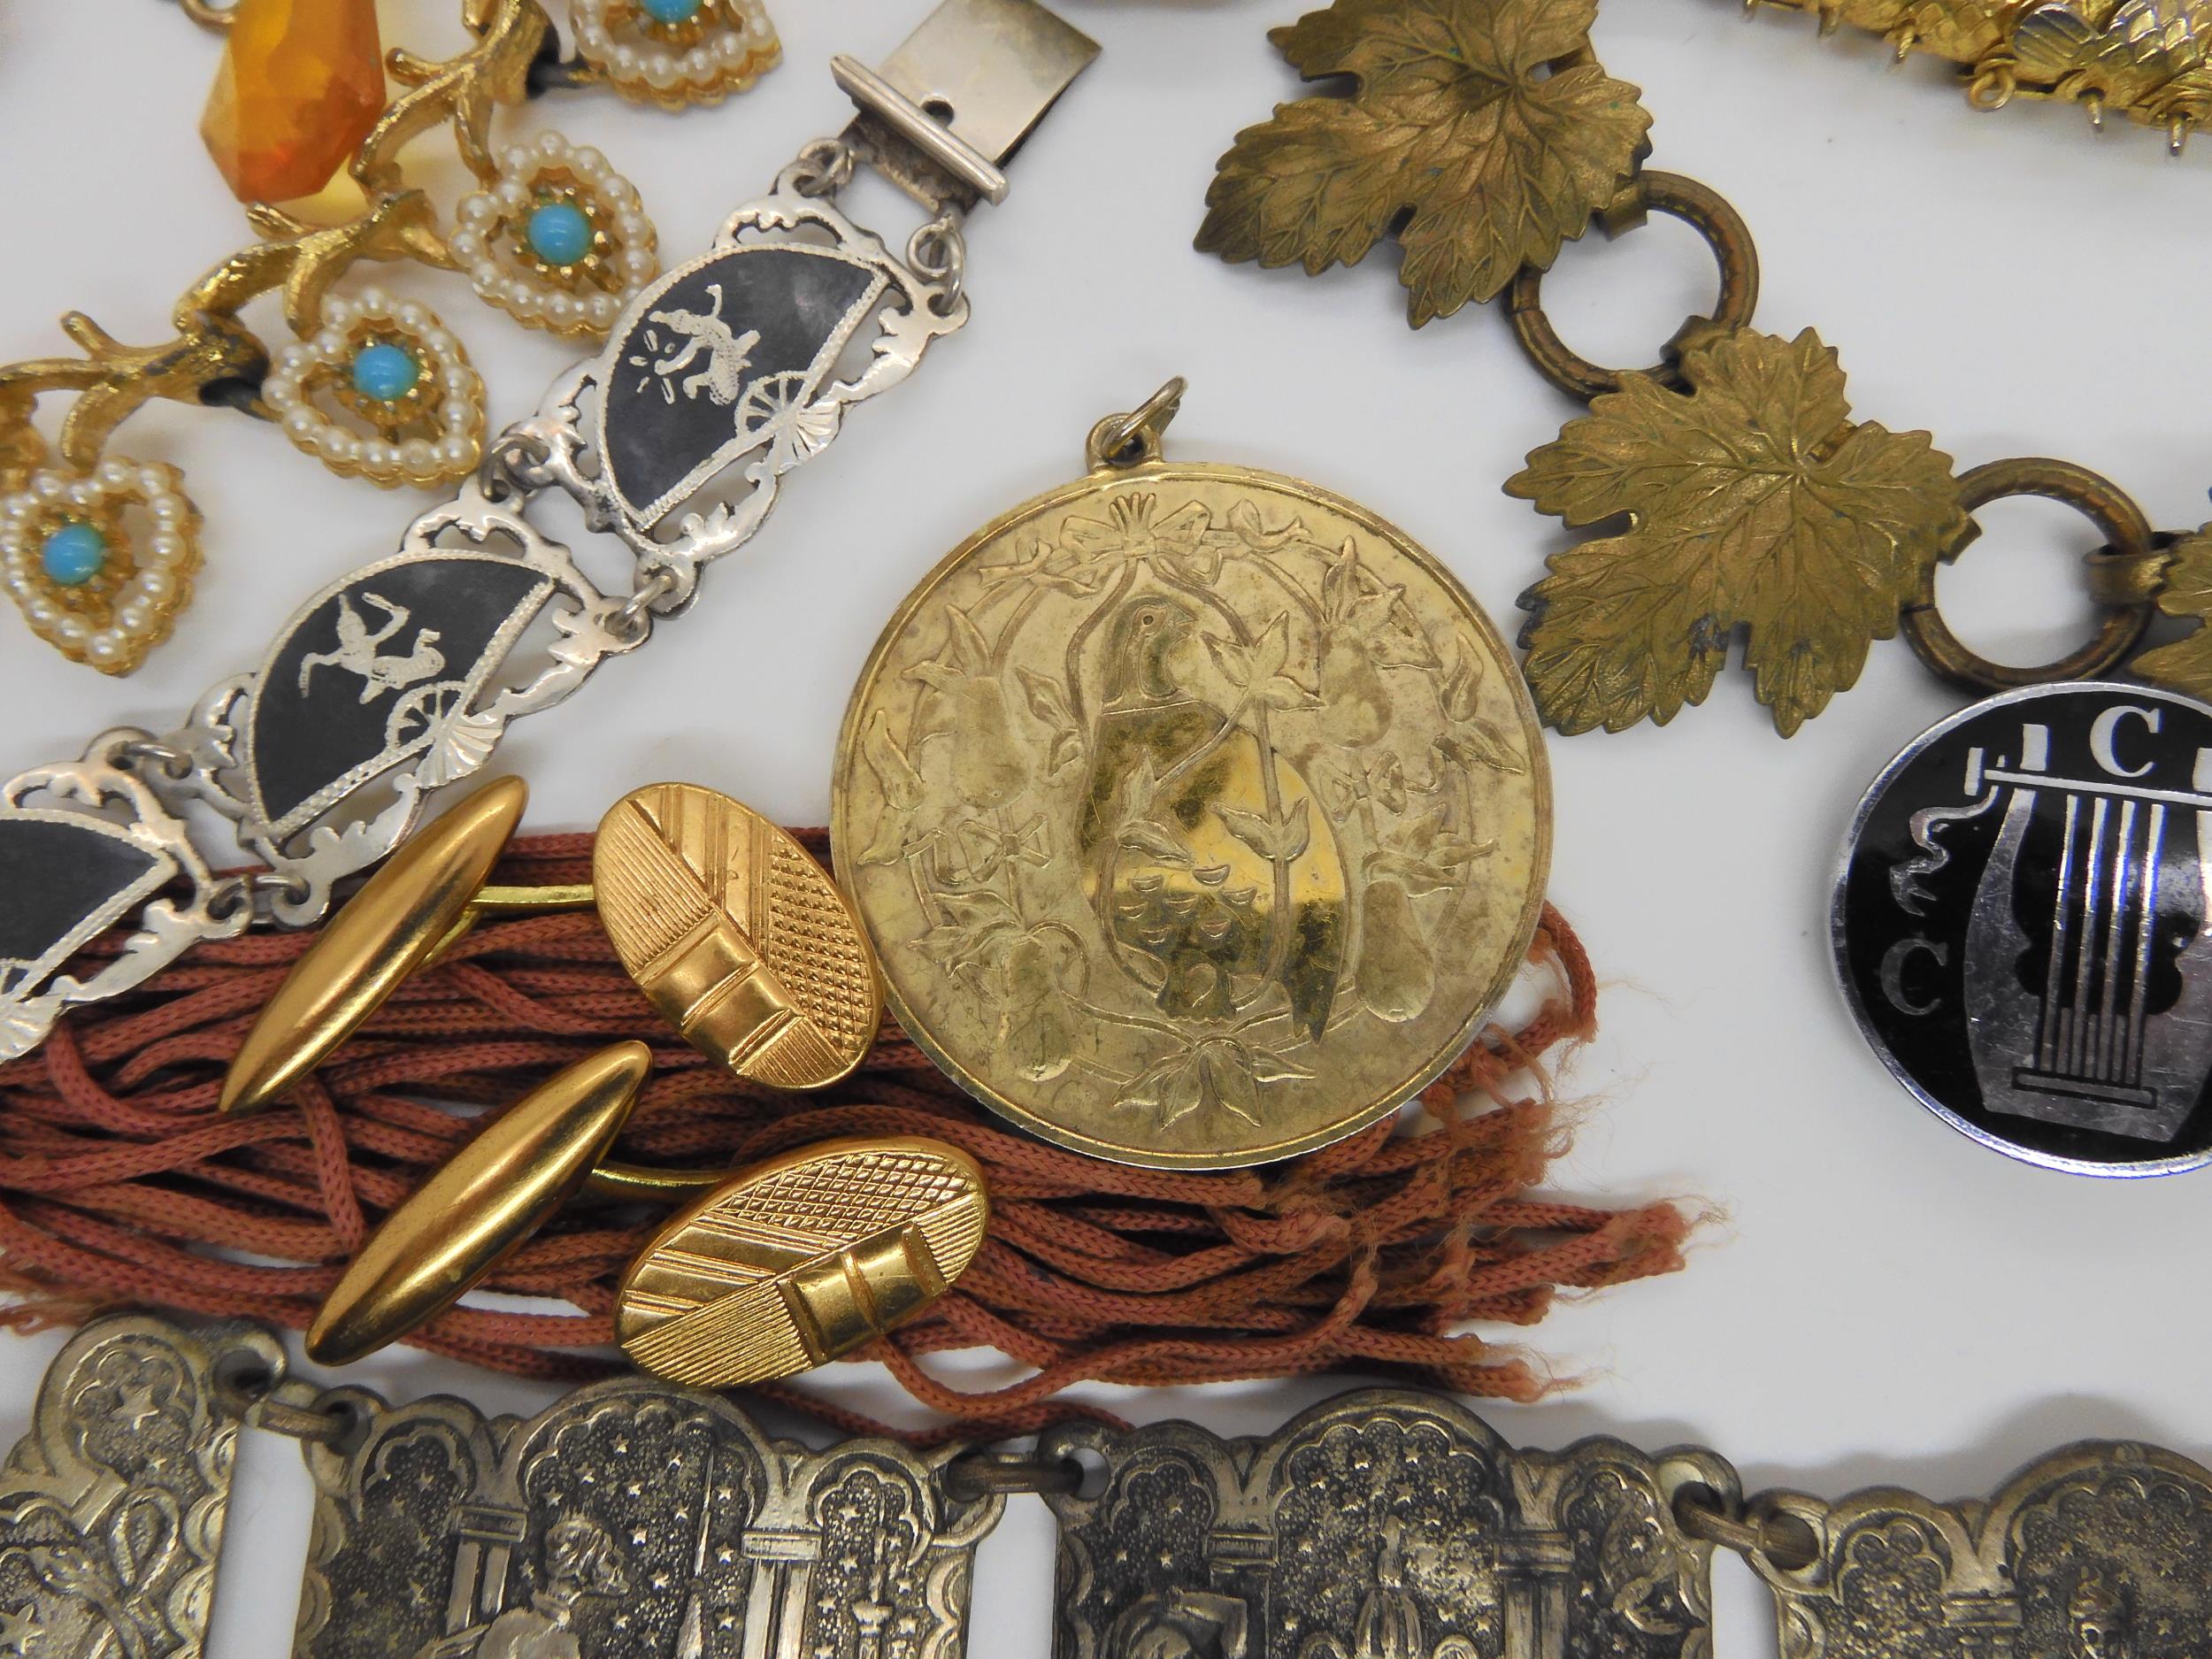 A silver gilt 'Partridge in a pear tree' pendant, a Siam wear peacock brooch and other items - Image 2 of 5